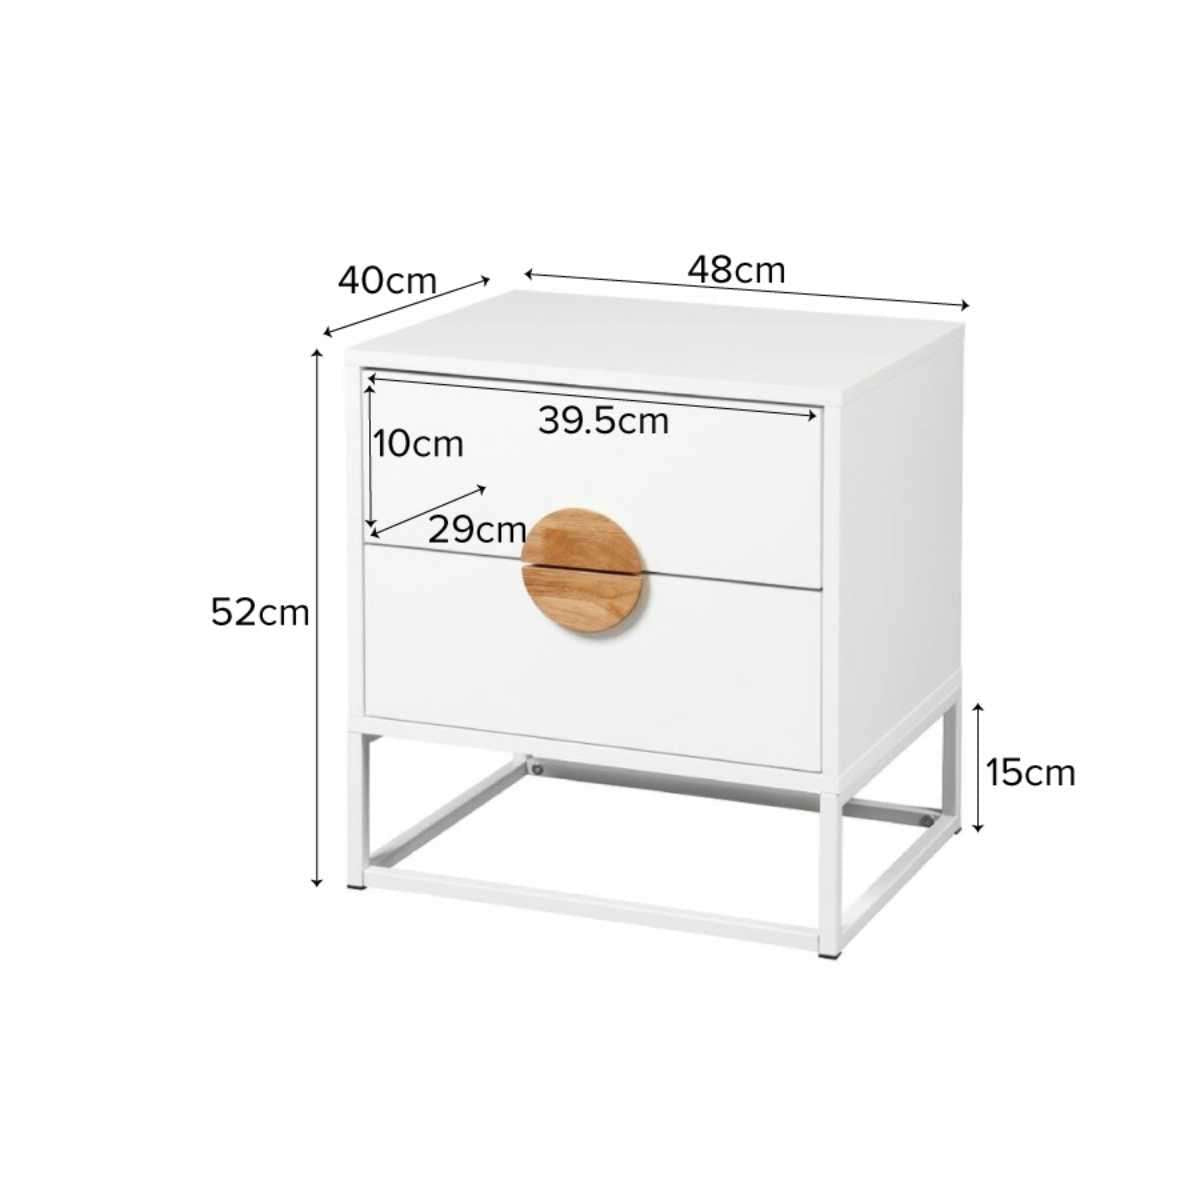 Eclipse Bedside Table - White